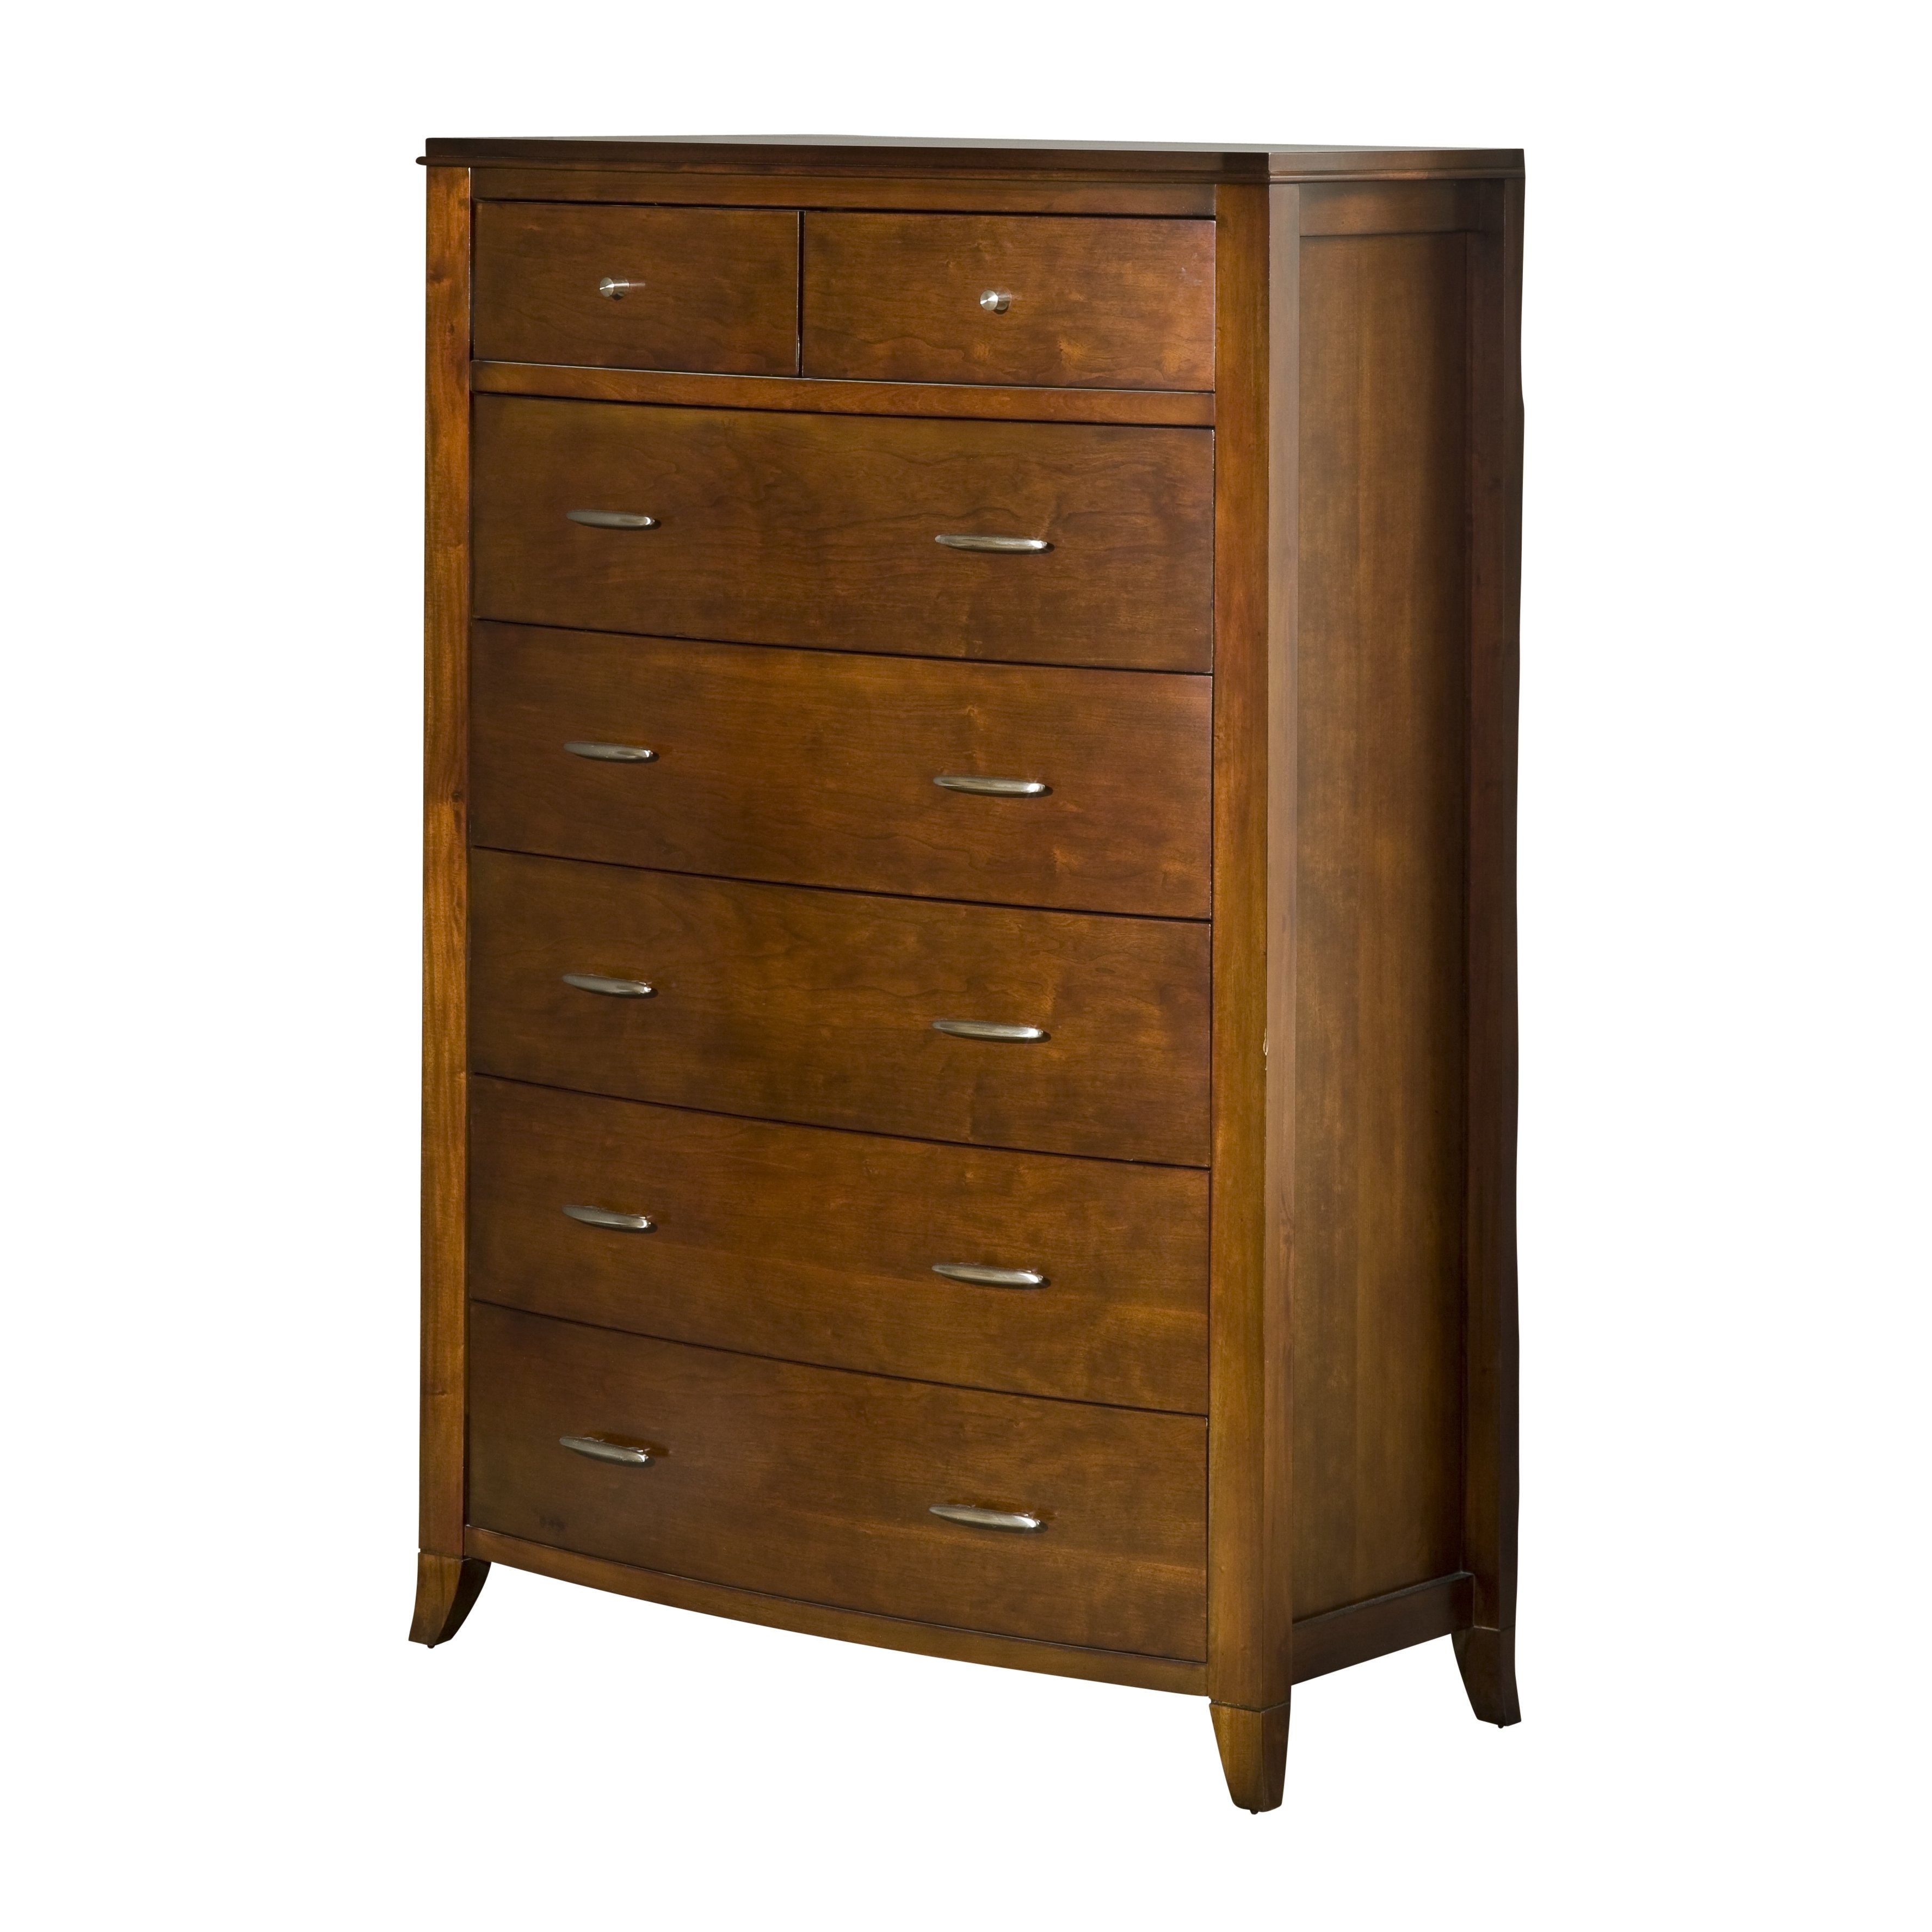 Viven 6PC E King Bed, 2 Nightstand, Dresser, Mirror & Chest Set in Mahogany Spice - image 2 of 6